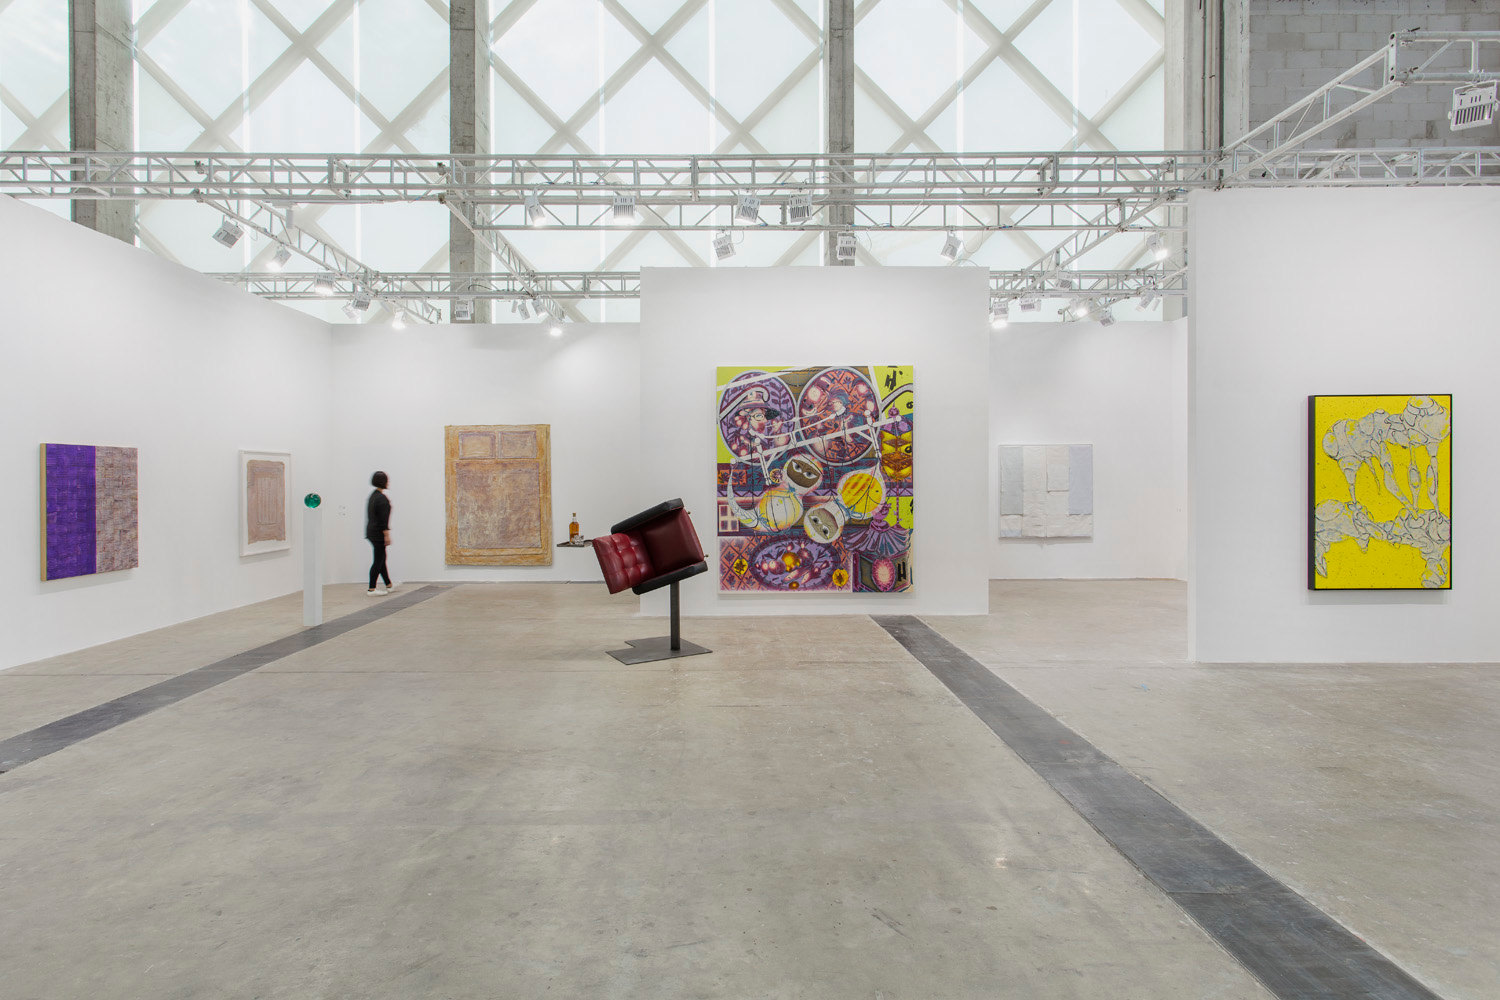 Installation view of Lehmann Maupin's booth at West Bund Art &amp; Design 2019 in Shanghai, view 1